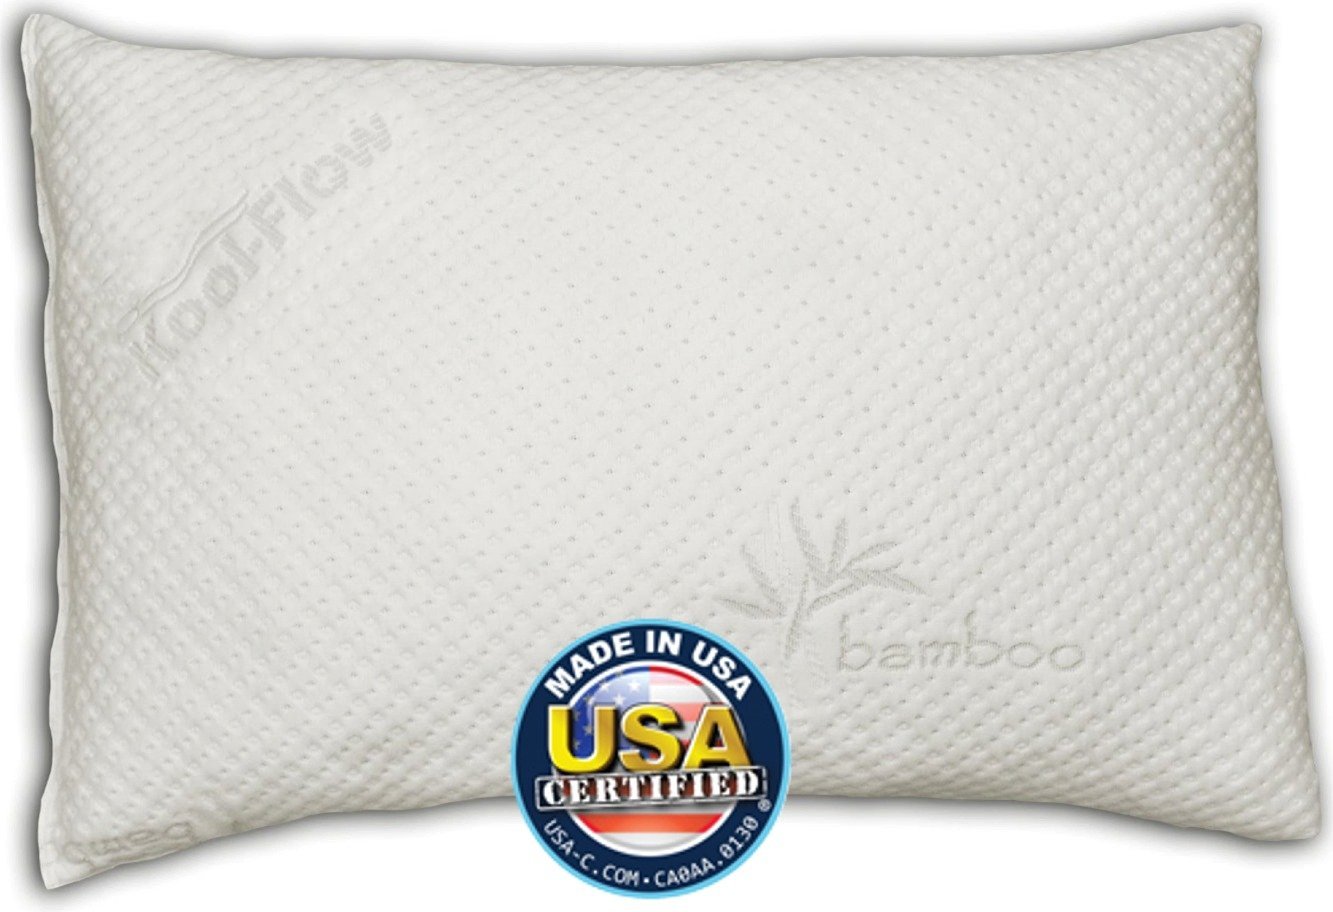 Top 10 Best Memory Foam Pillows to Help You Get High-Quality Sleep